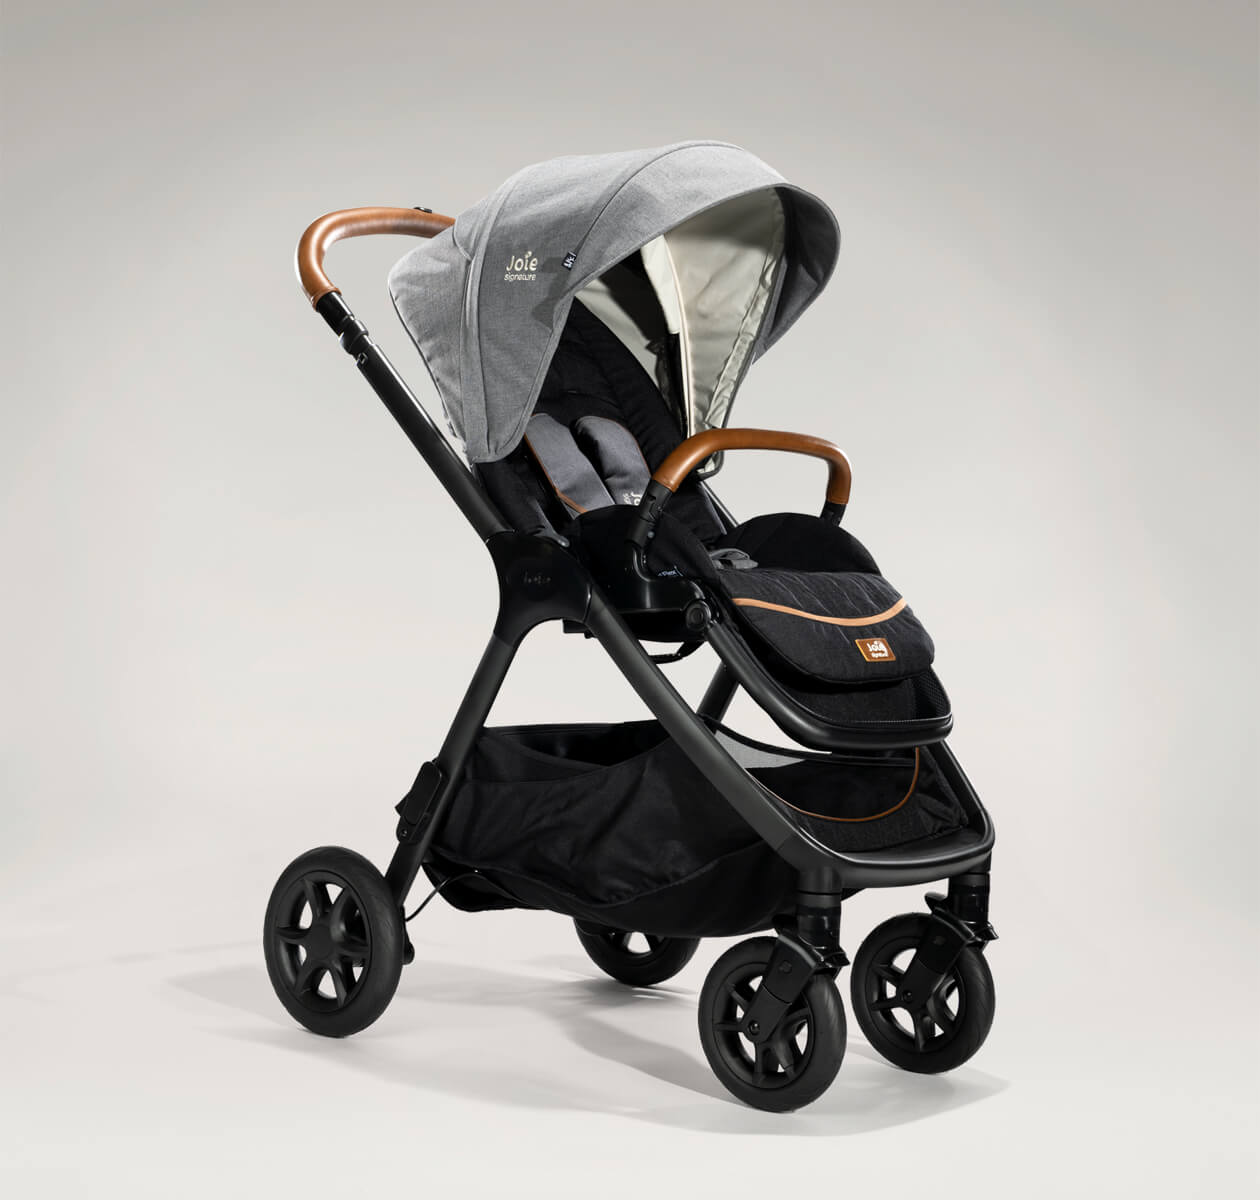  Joie finiti pram in black and gray at an angle. 